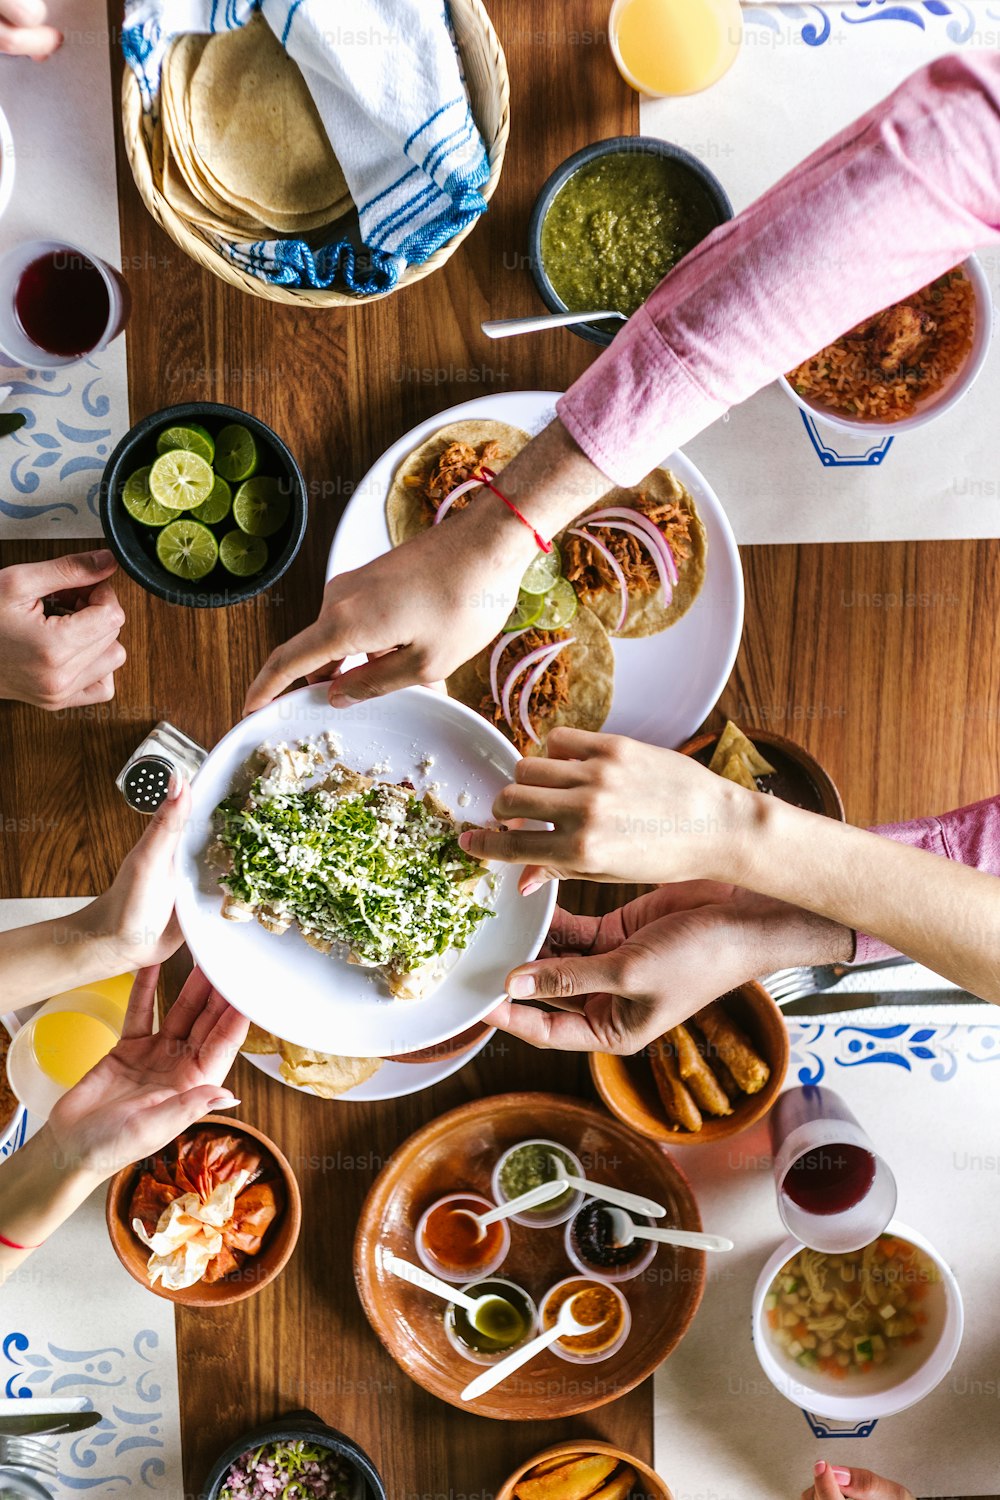 group of latin Friends eating Mexican Tacos and traditional food, snacks and peoples hands over table, top view. Mexican cuisine Latin America